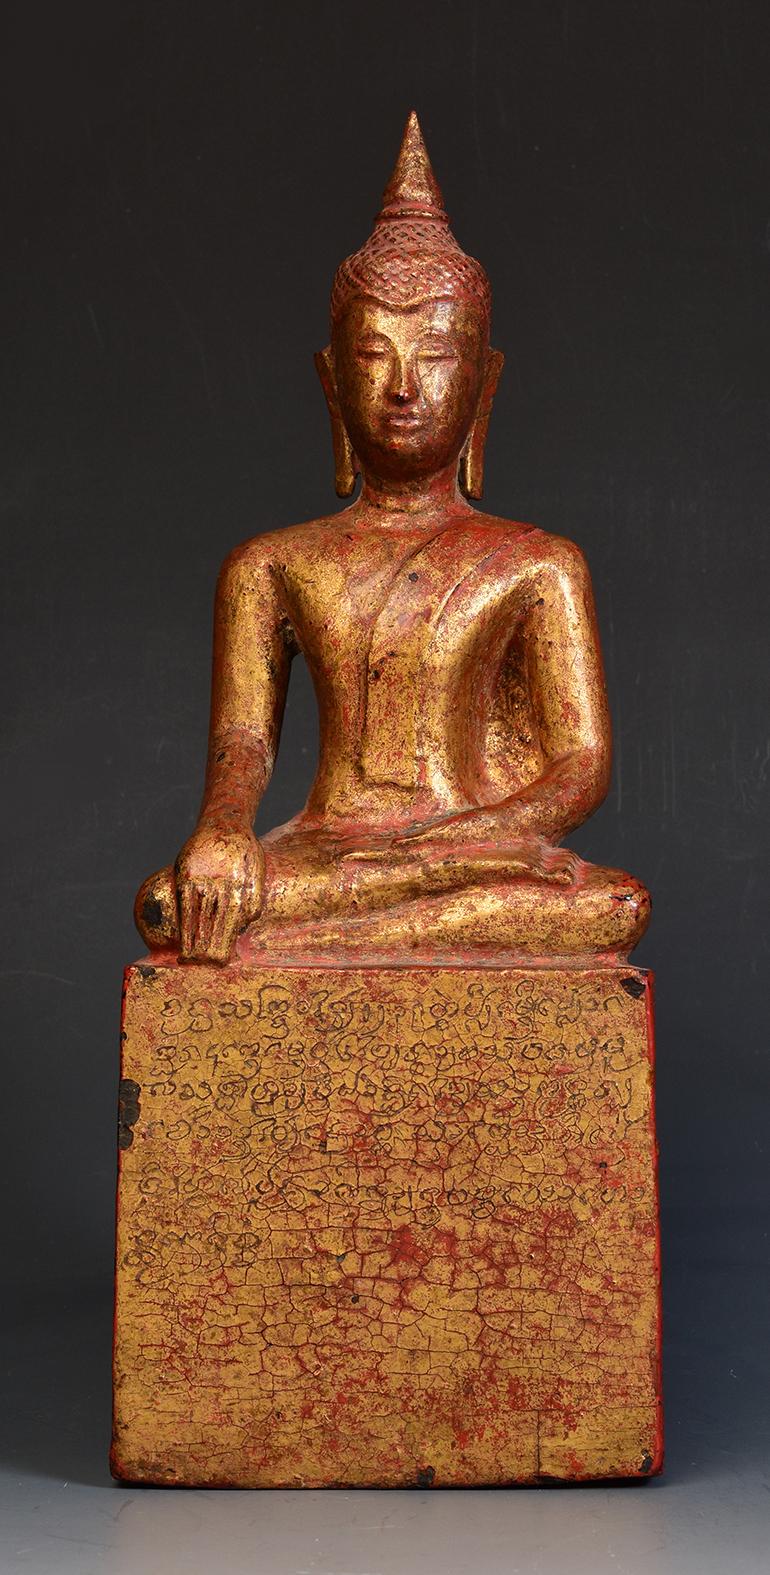 Lanna Thai wooden Buddha sitting in Mara Vijaya (calling the earth to witness) posture on a base.

Age: Thailand, 19th century
Size: Height 29.2 cm / Width 11.5 cm
Condition: Nice condition overall (some expected degradation due to its